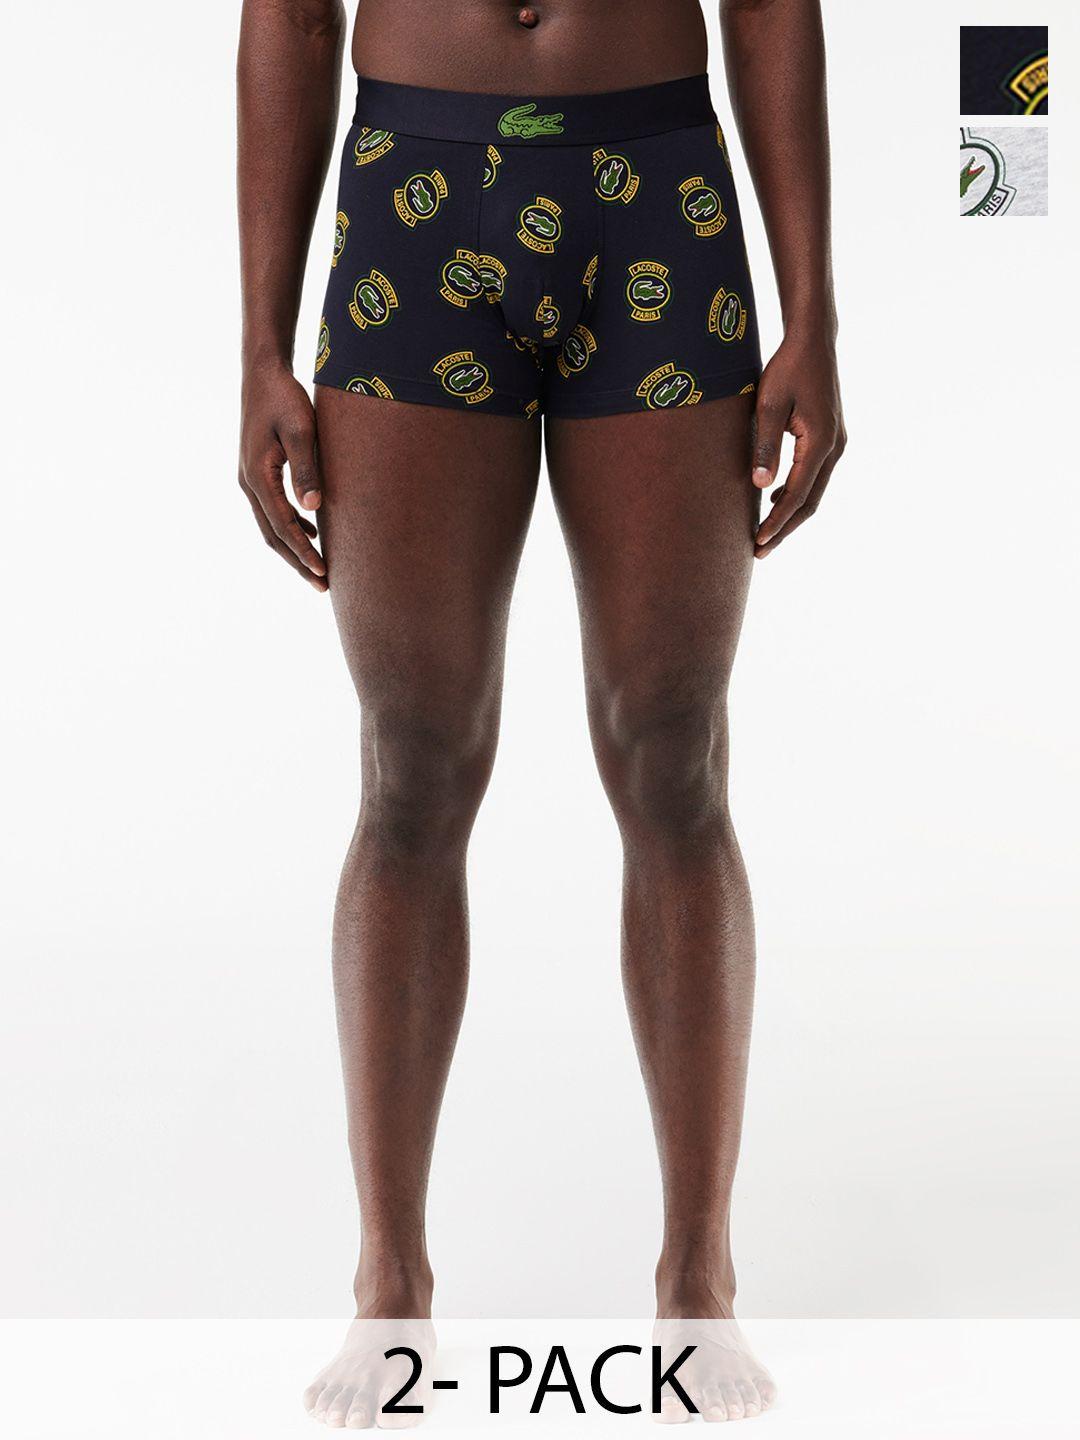 lacoste stretch jersey pack of 2 printed trunks 5h8396kg2 s